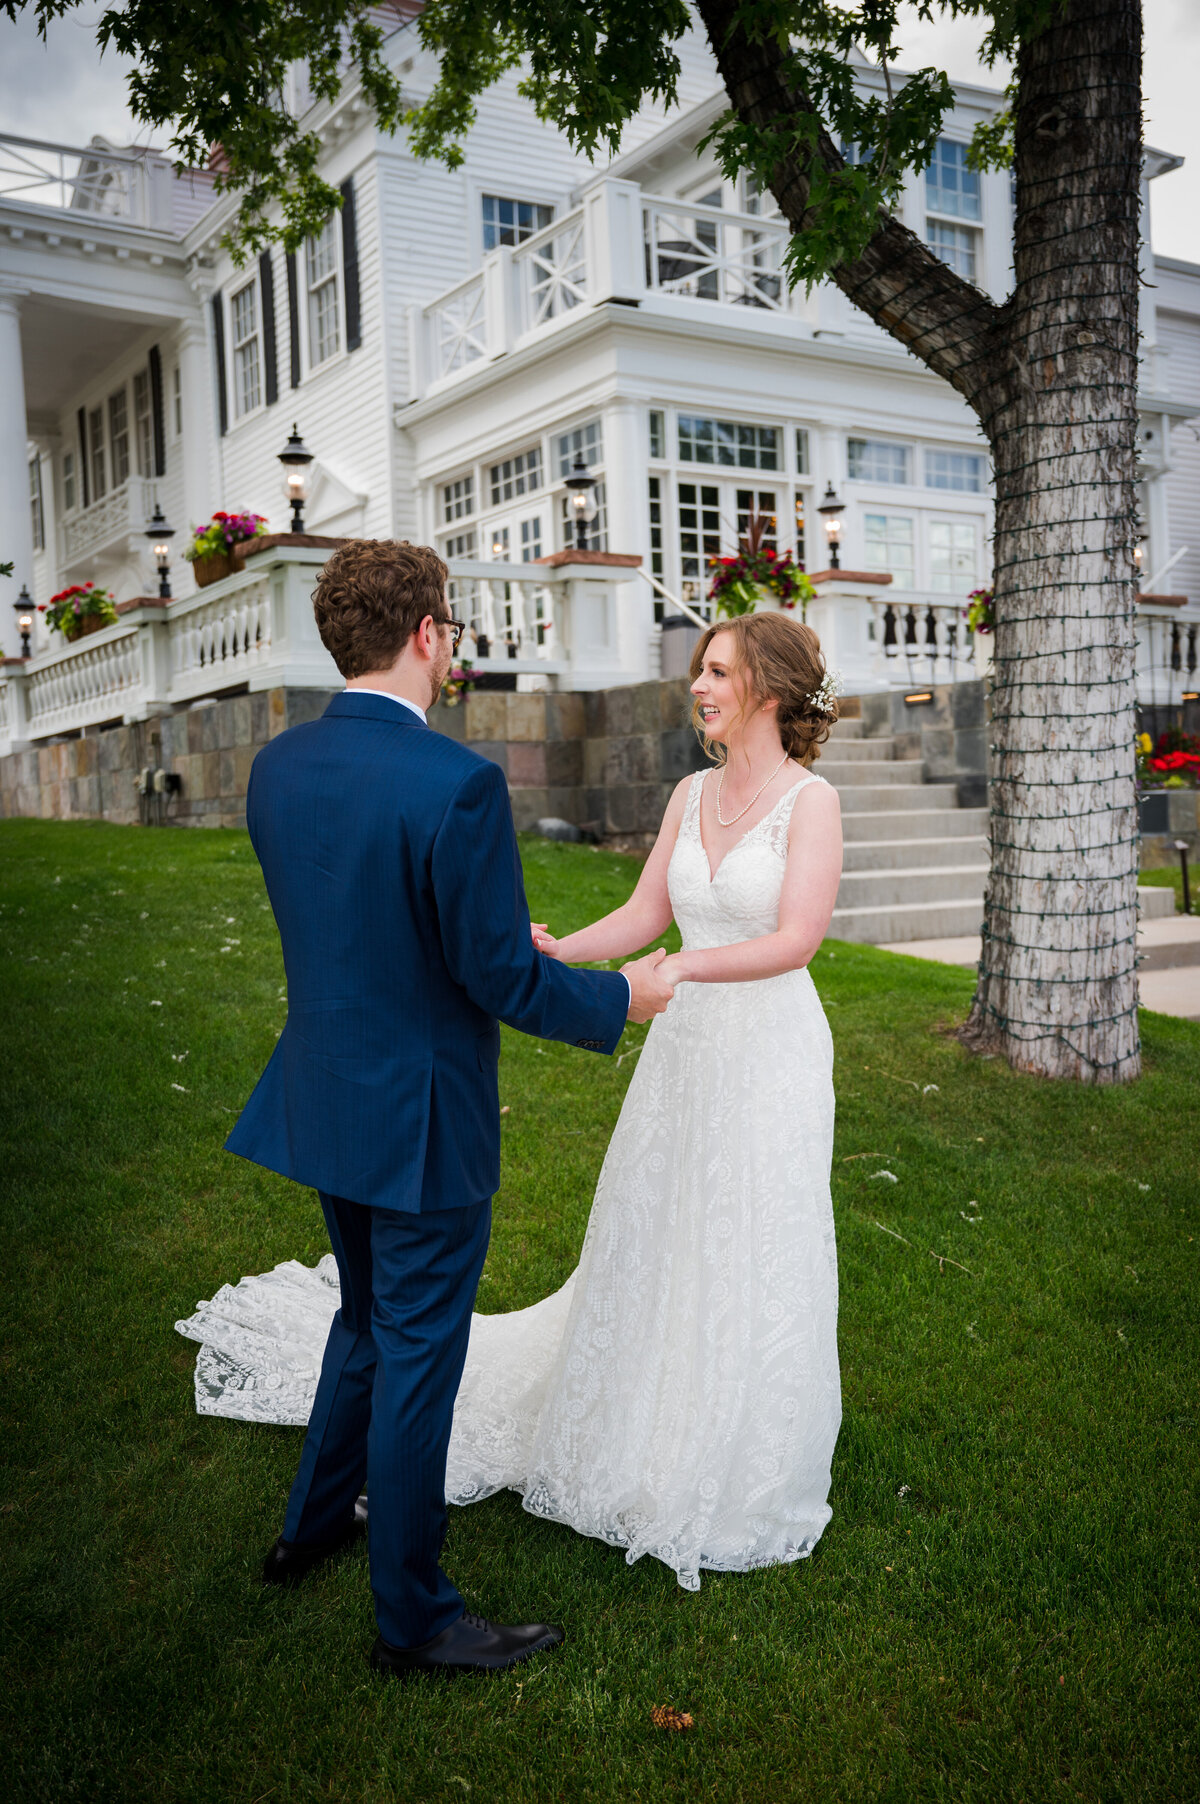 A bride and groom hold hands during their first look at The Manor House, captured by Denver wedding photographer Two One Photography.